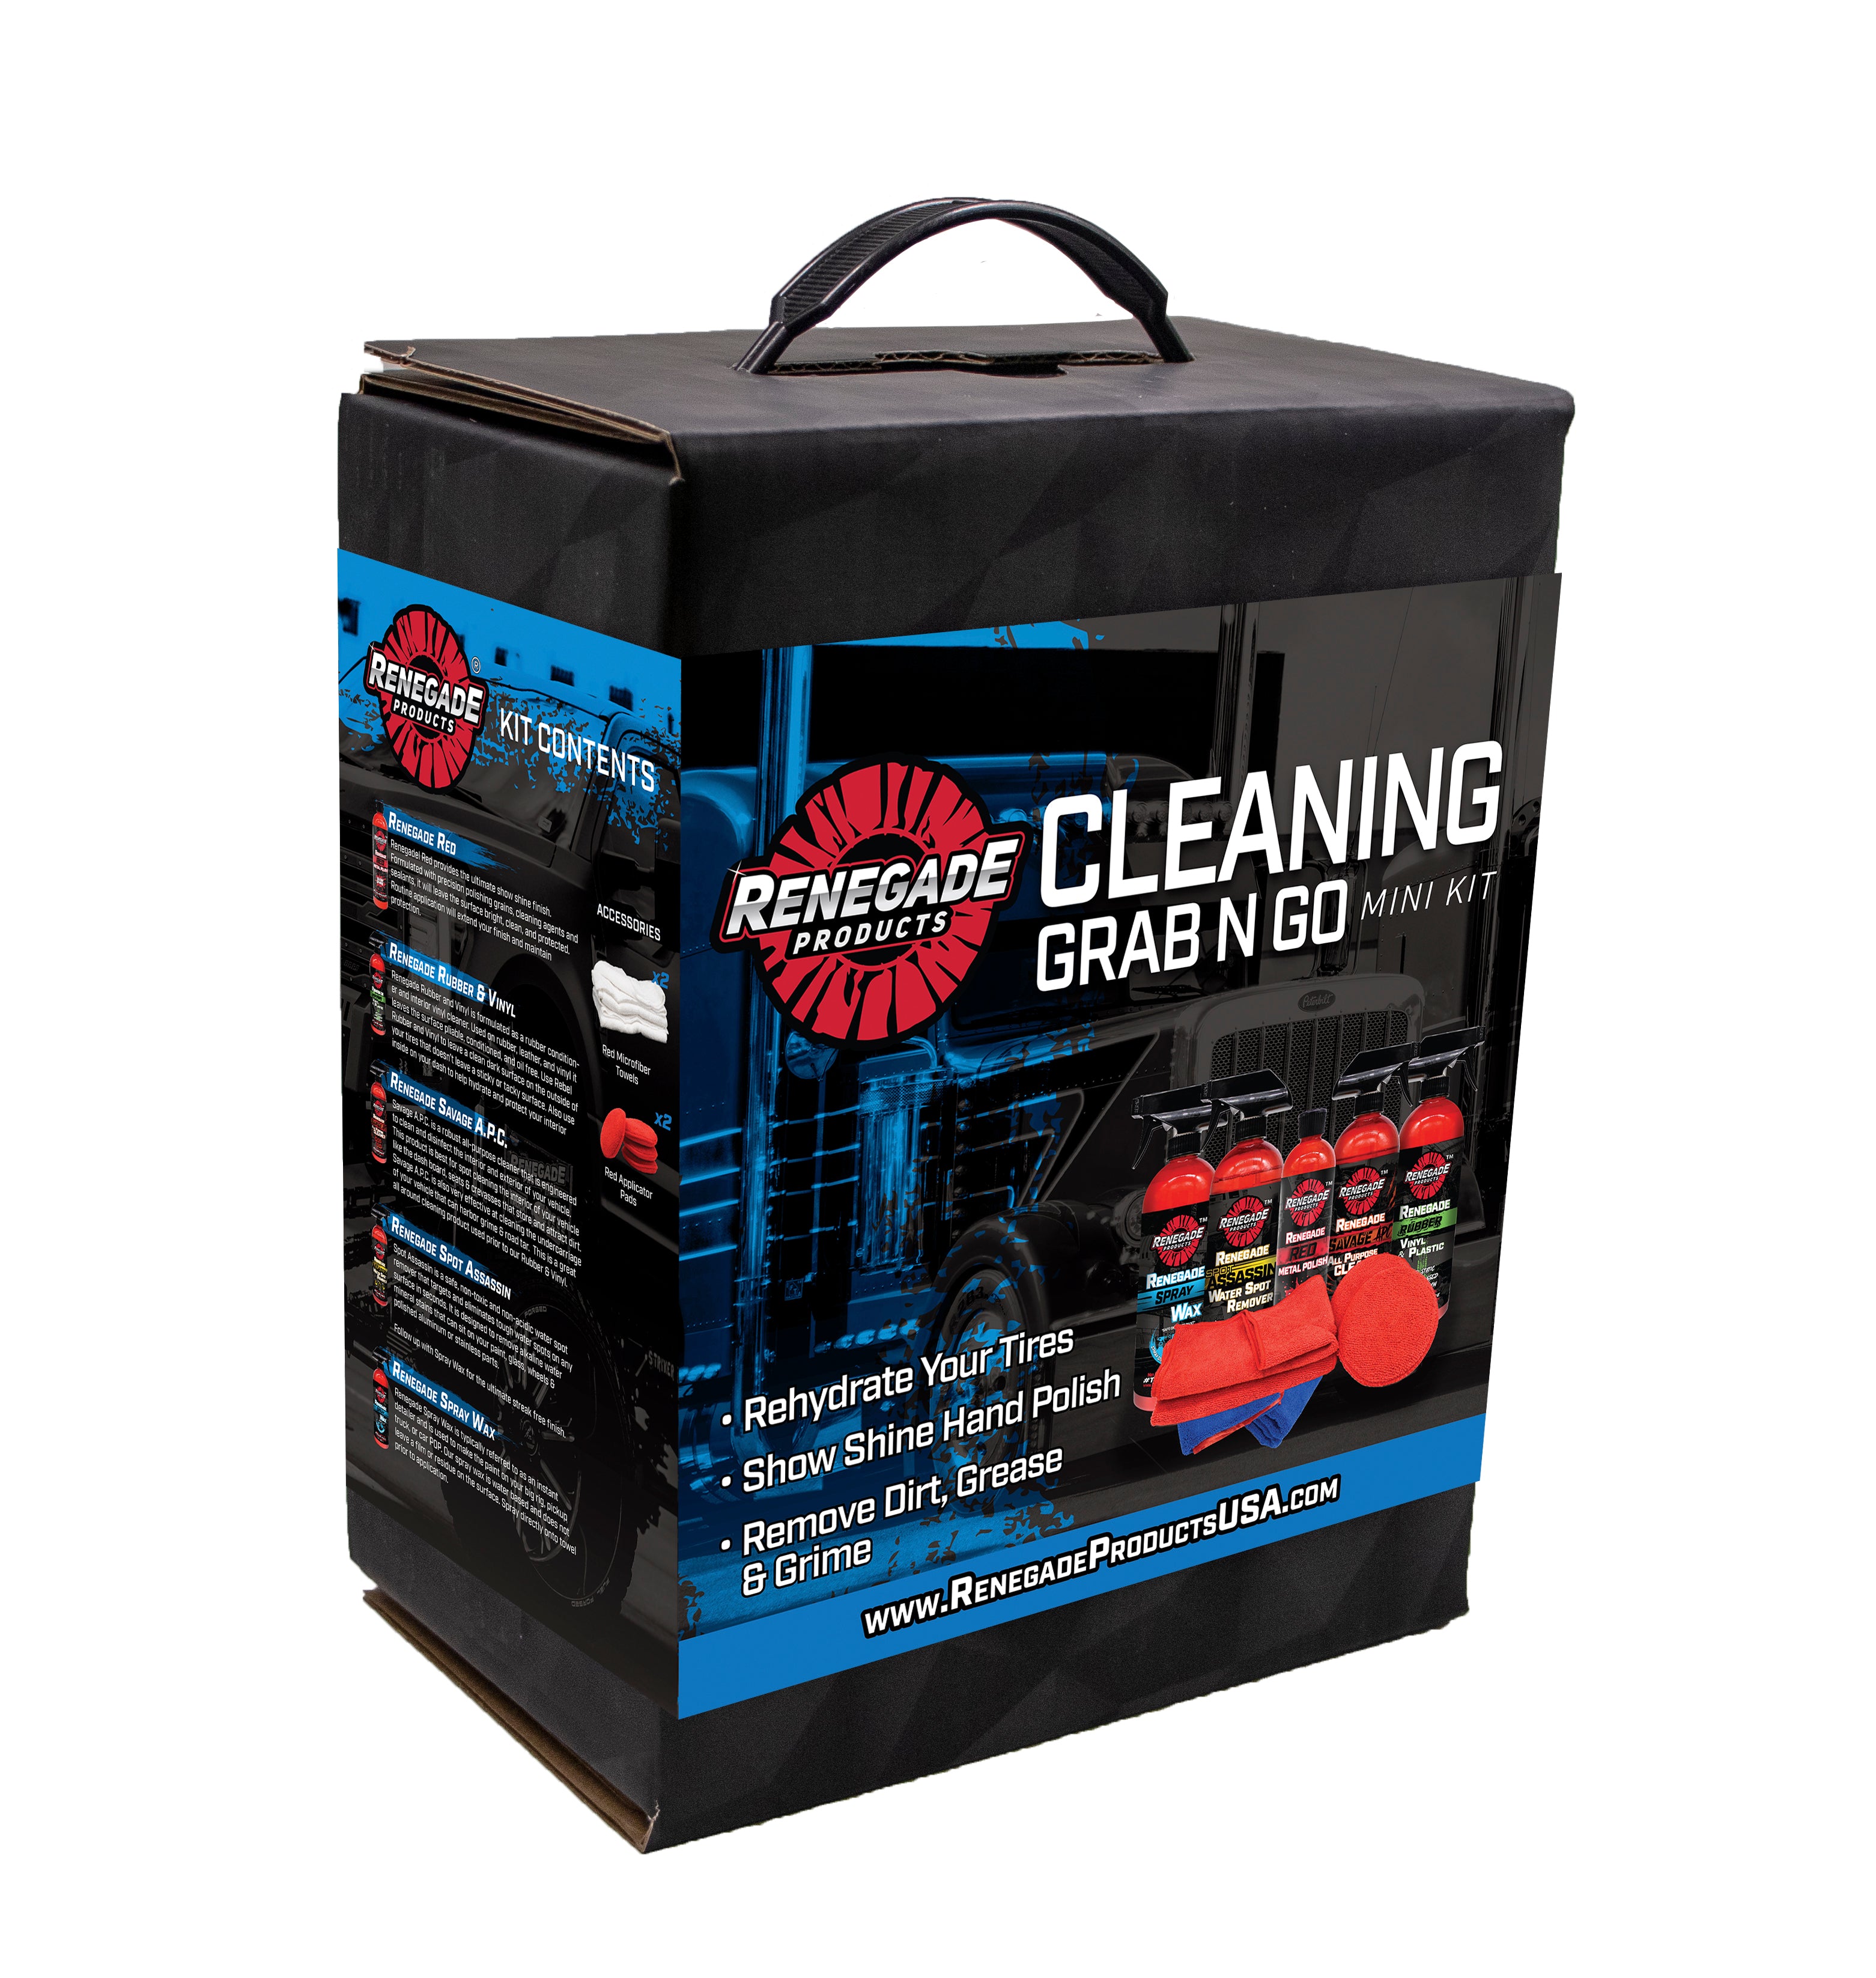 Cleaning Grab-N-Go Mini Kit Renegade Products USA